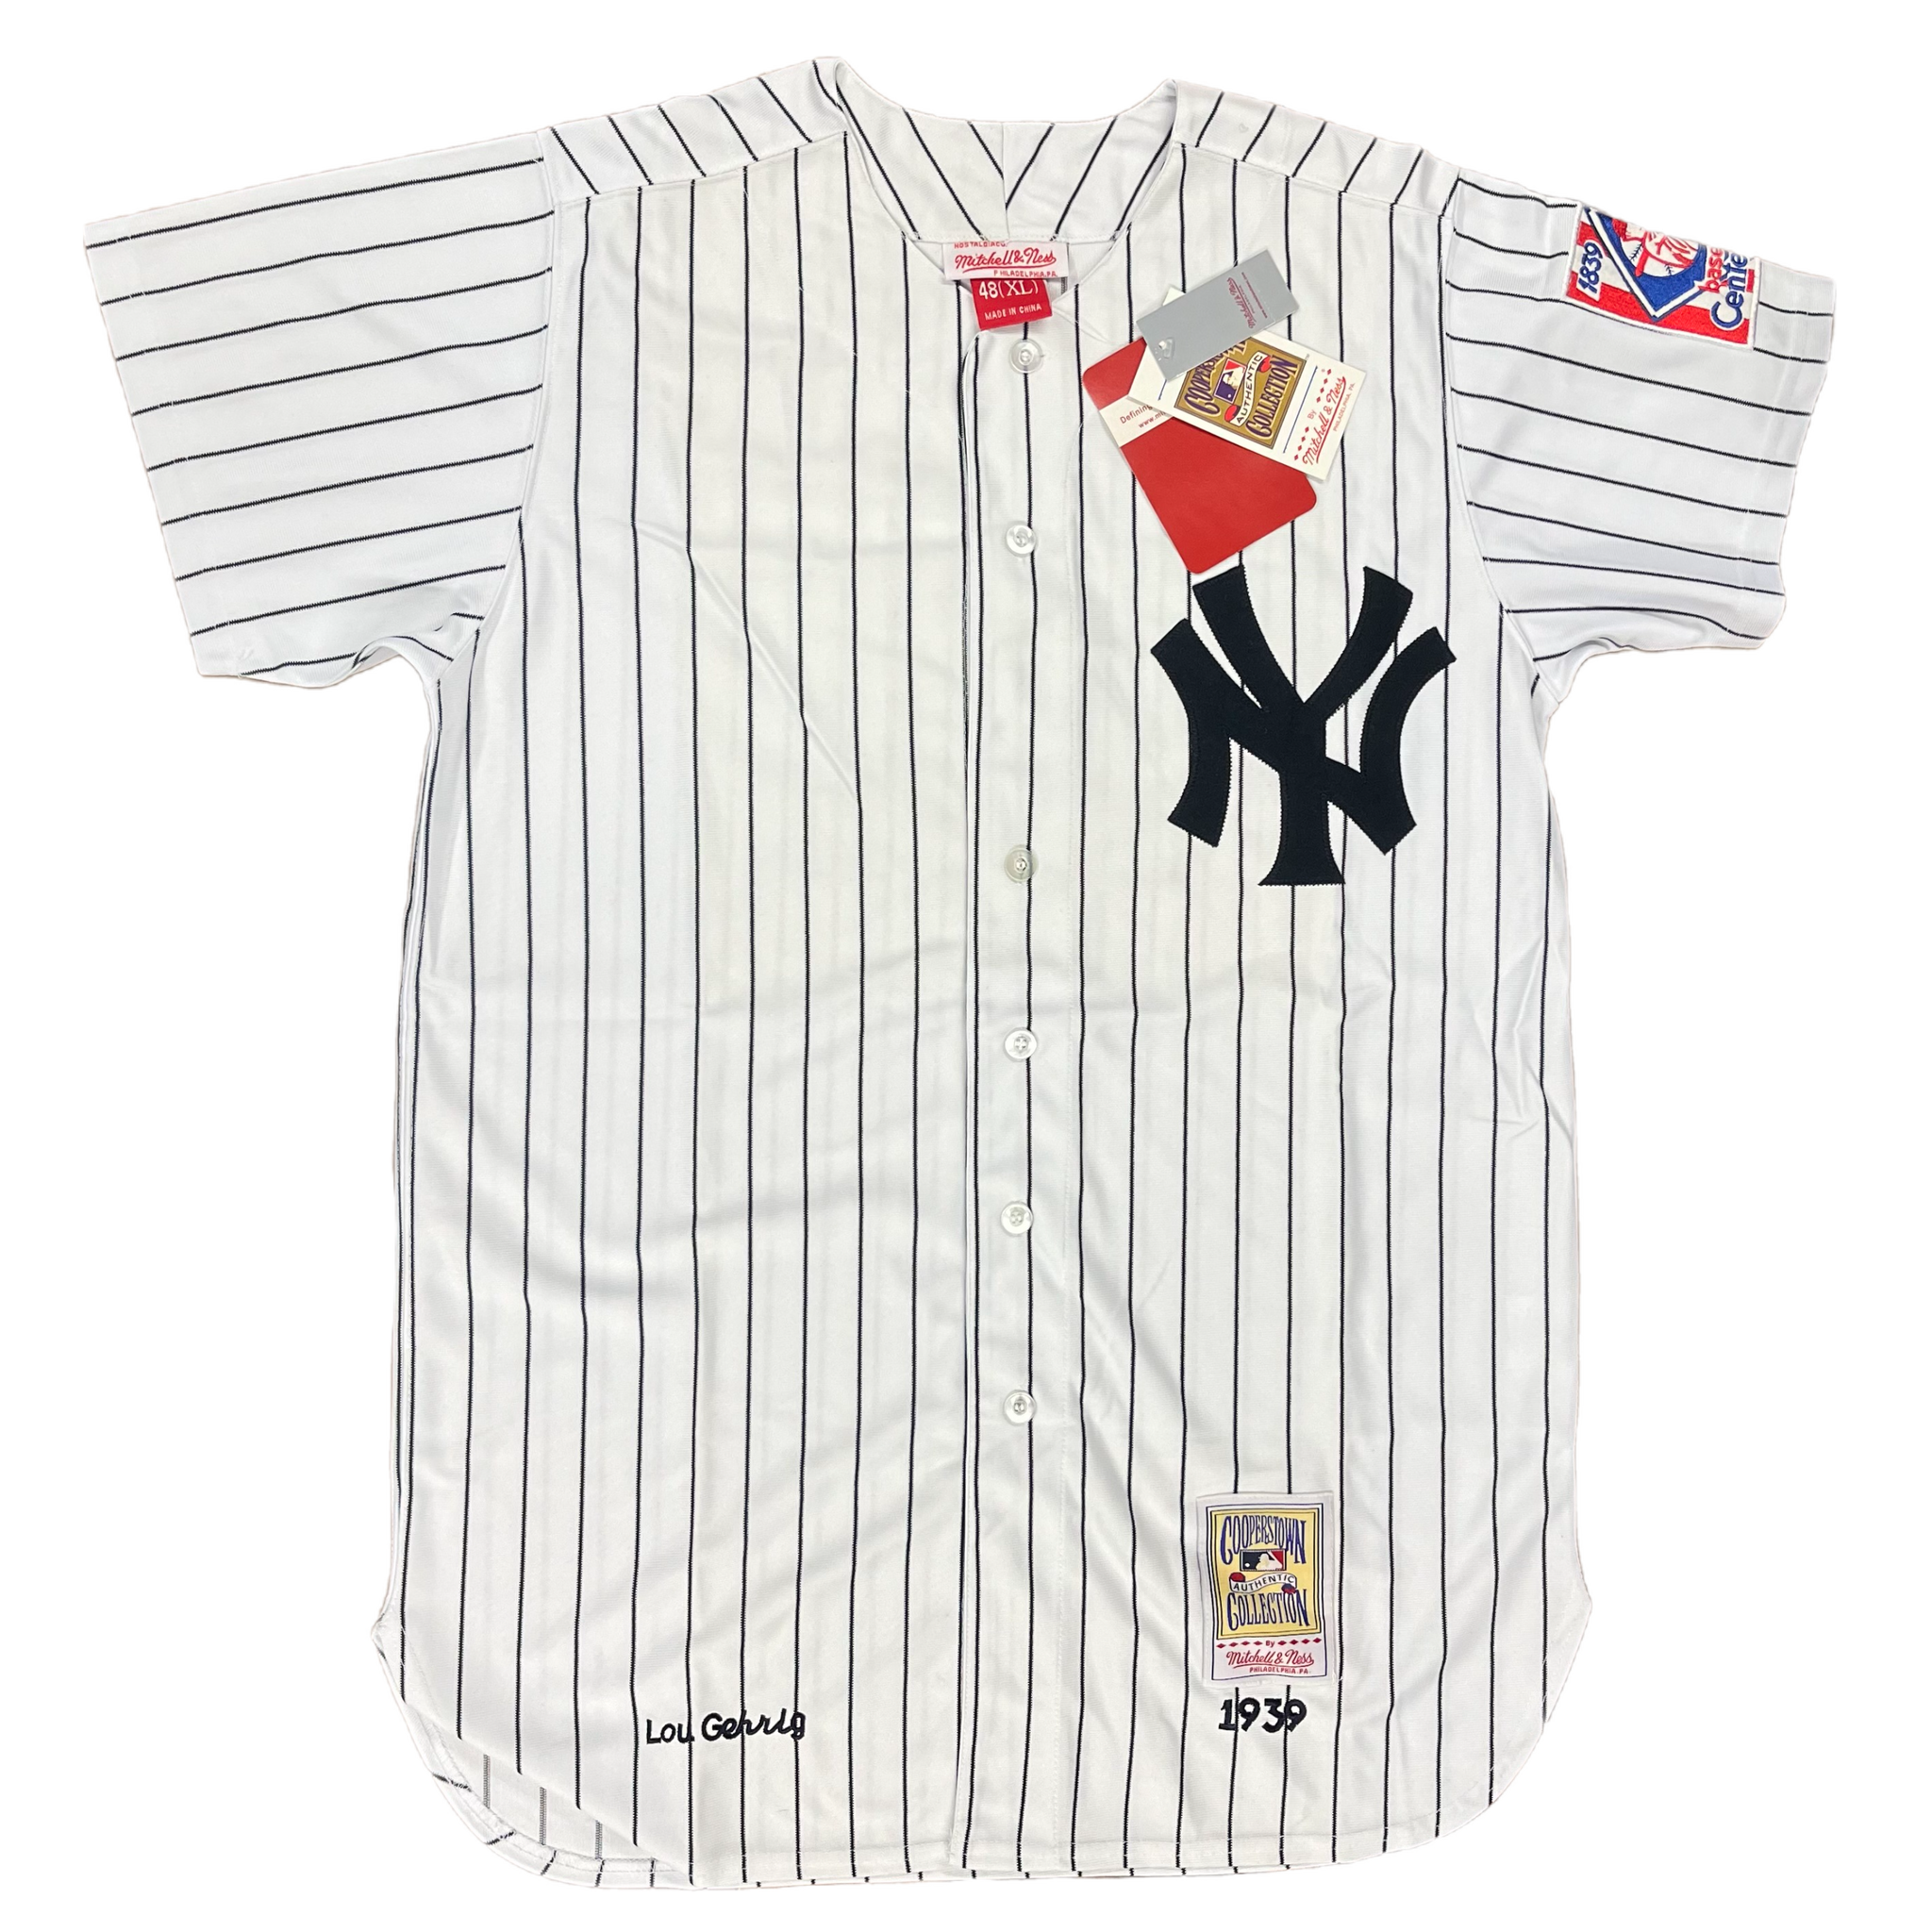 Official Lou Gehrig New York Yankees Jersey, Lou Gehrig Shirts, Yankees  Apparel, Lou Gehrig Gear